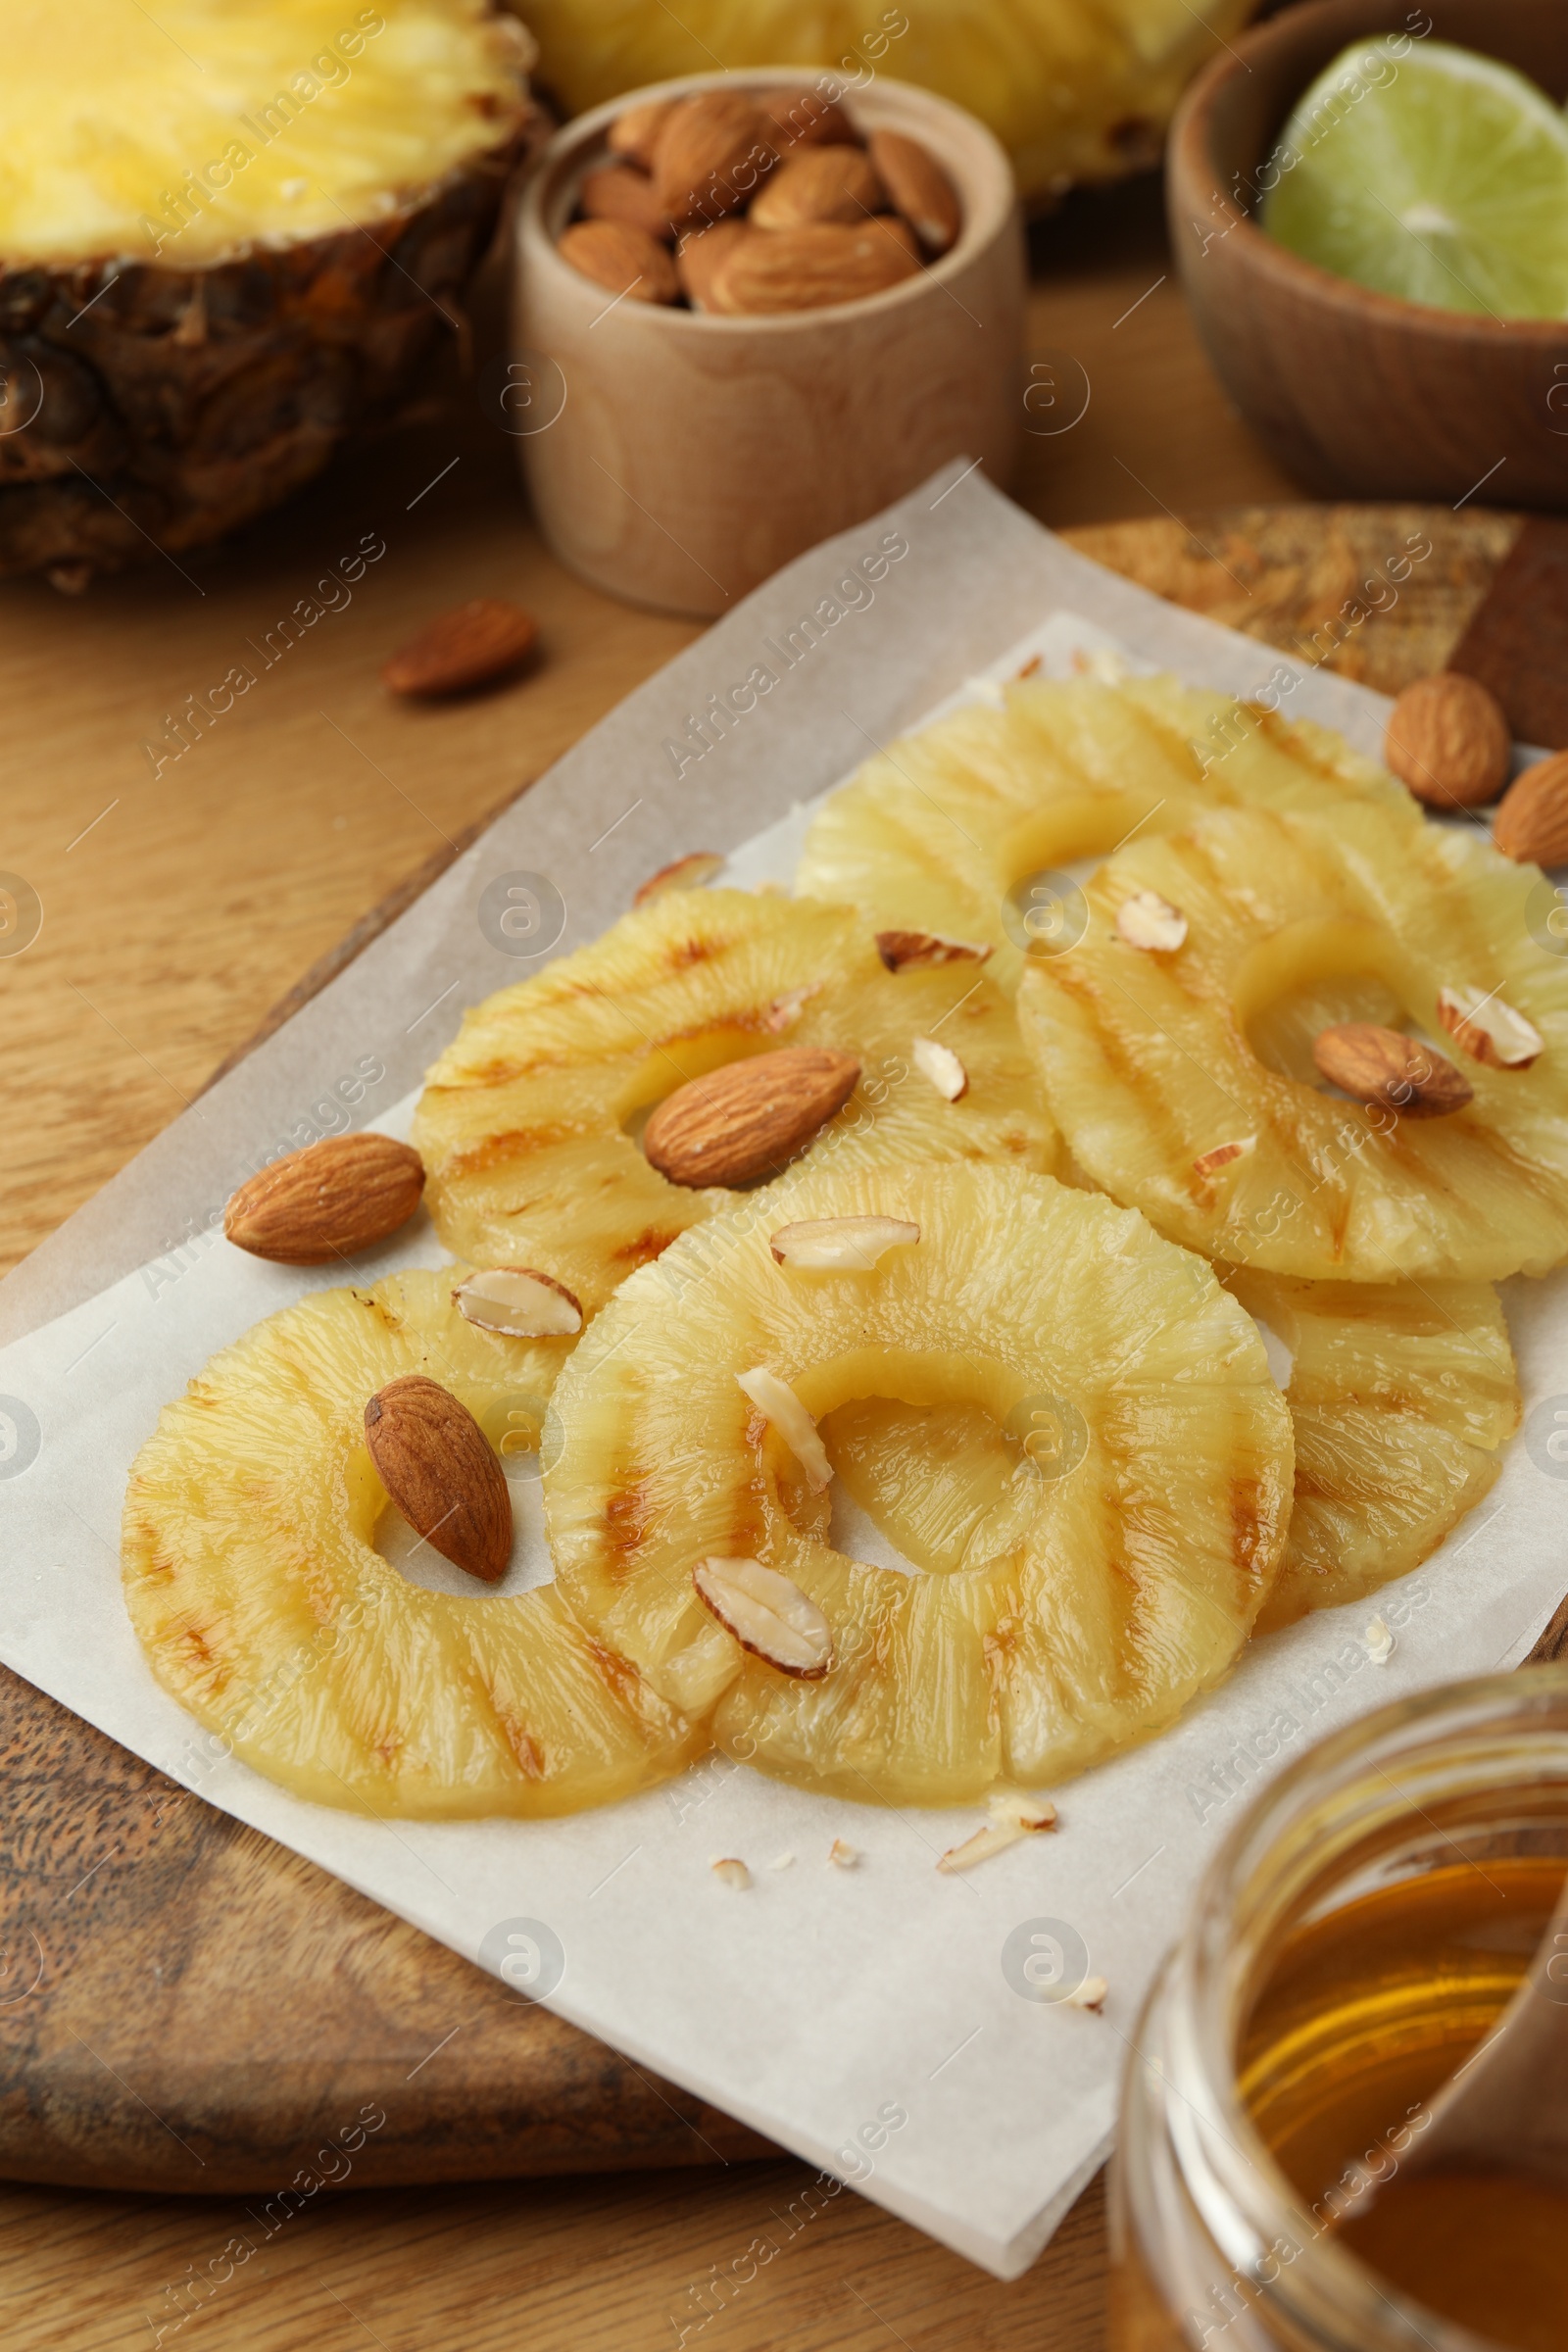 Photo of Tasty grilled pineapple slices and almonds on wooden table